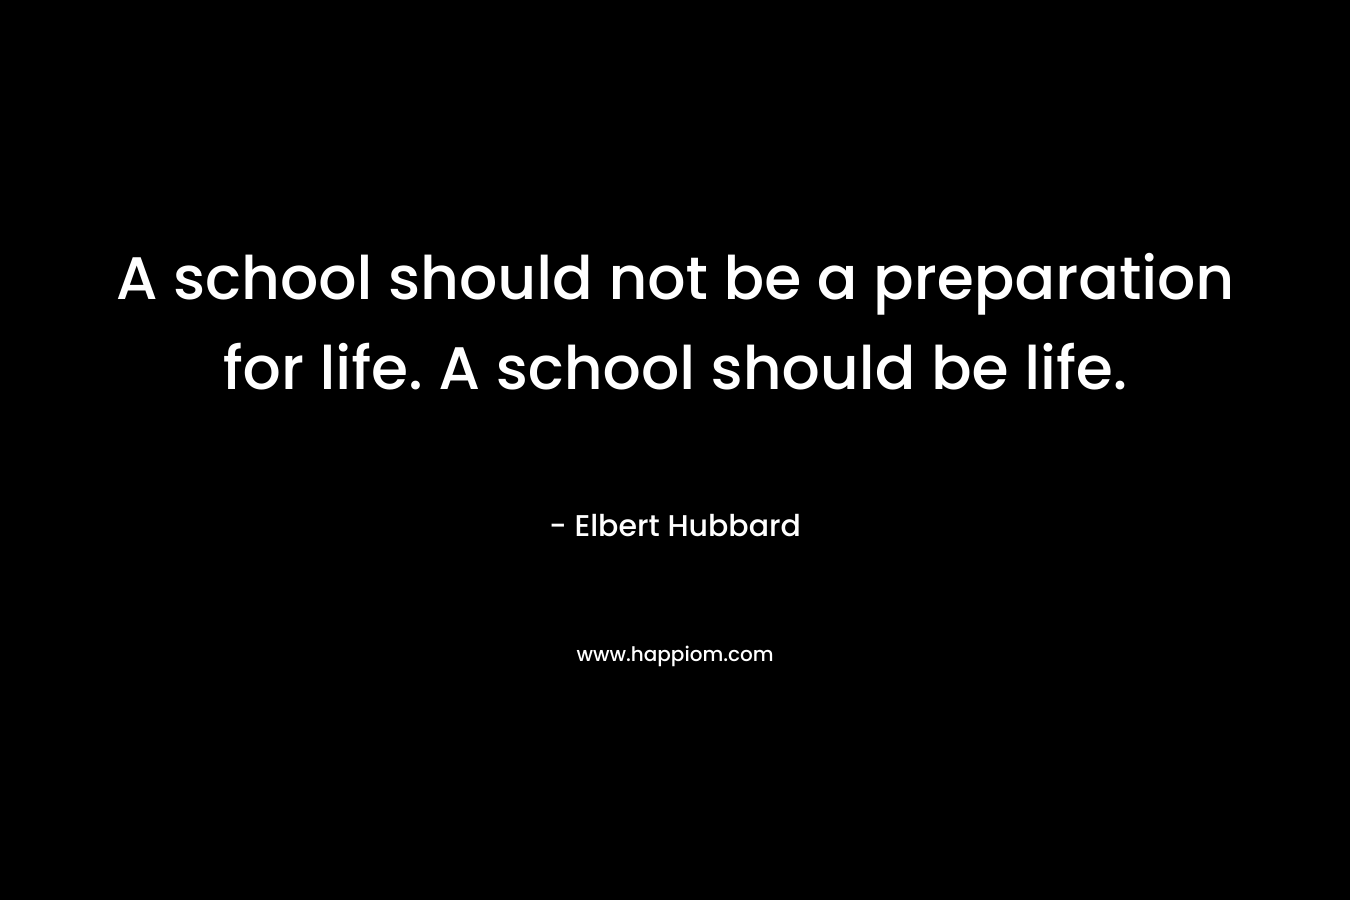 A school should not be a preparation for life. A school should be life.